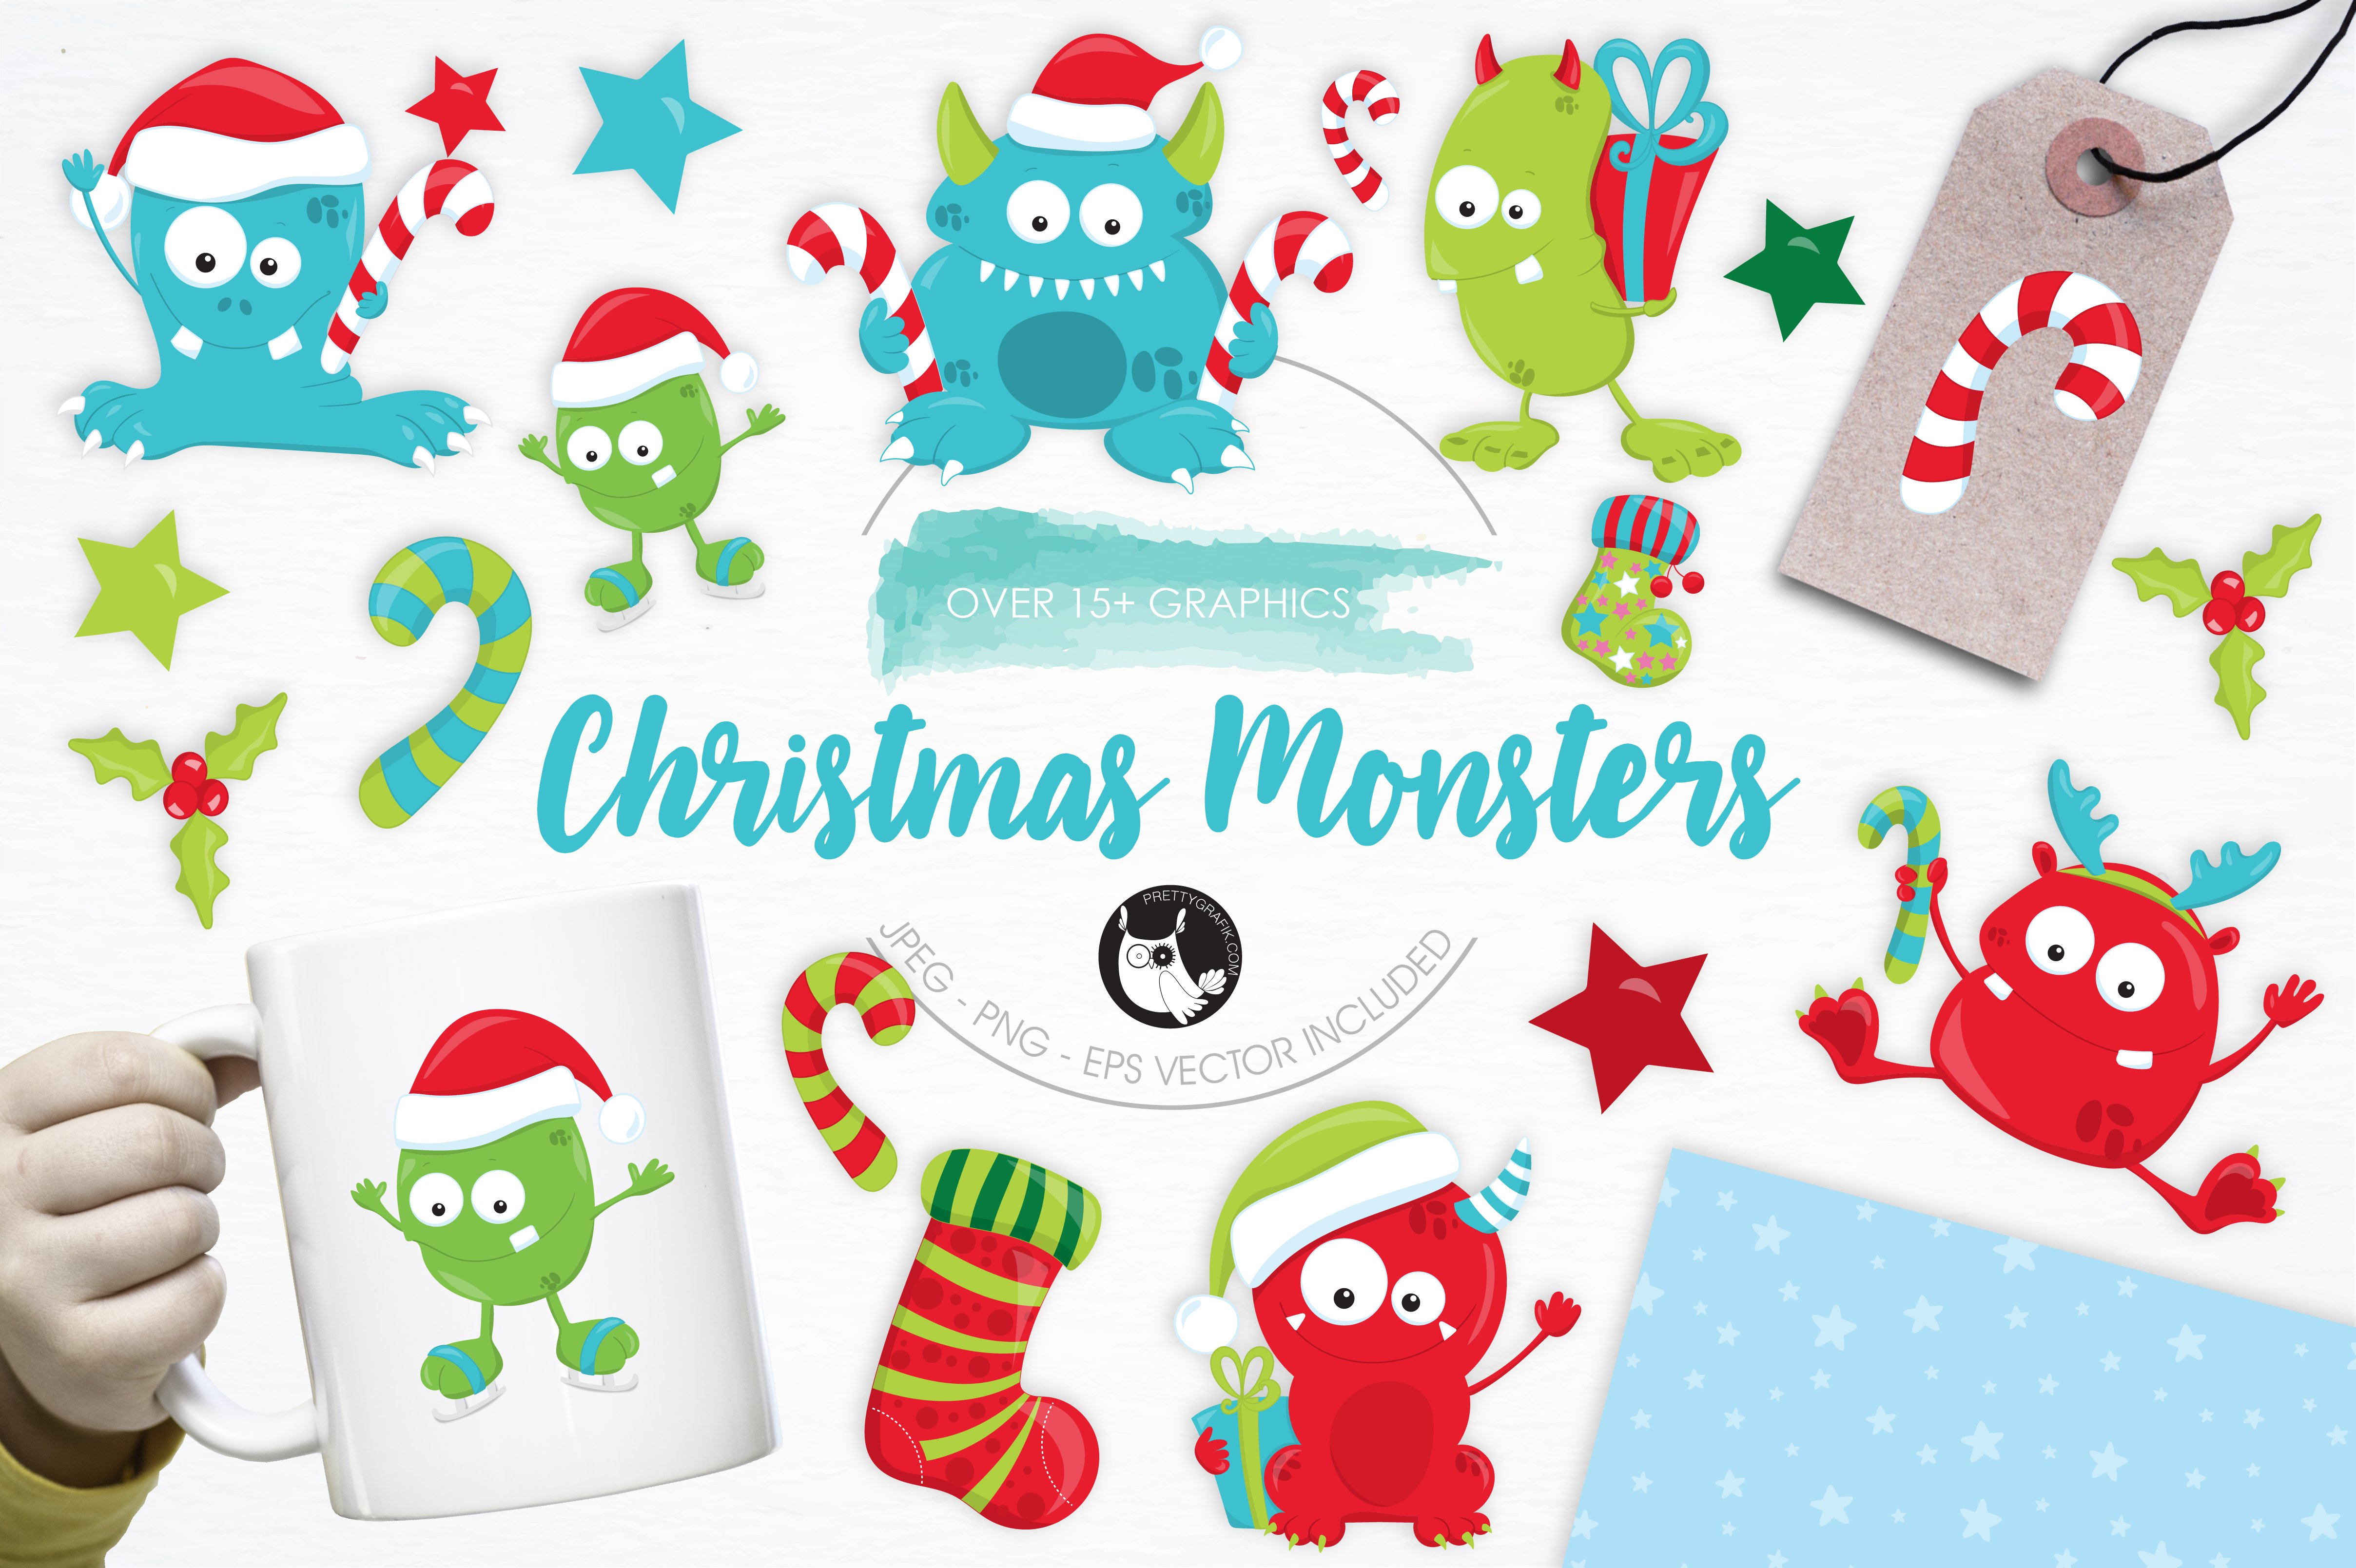 Christmas Monsters illustration pack cover image.